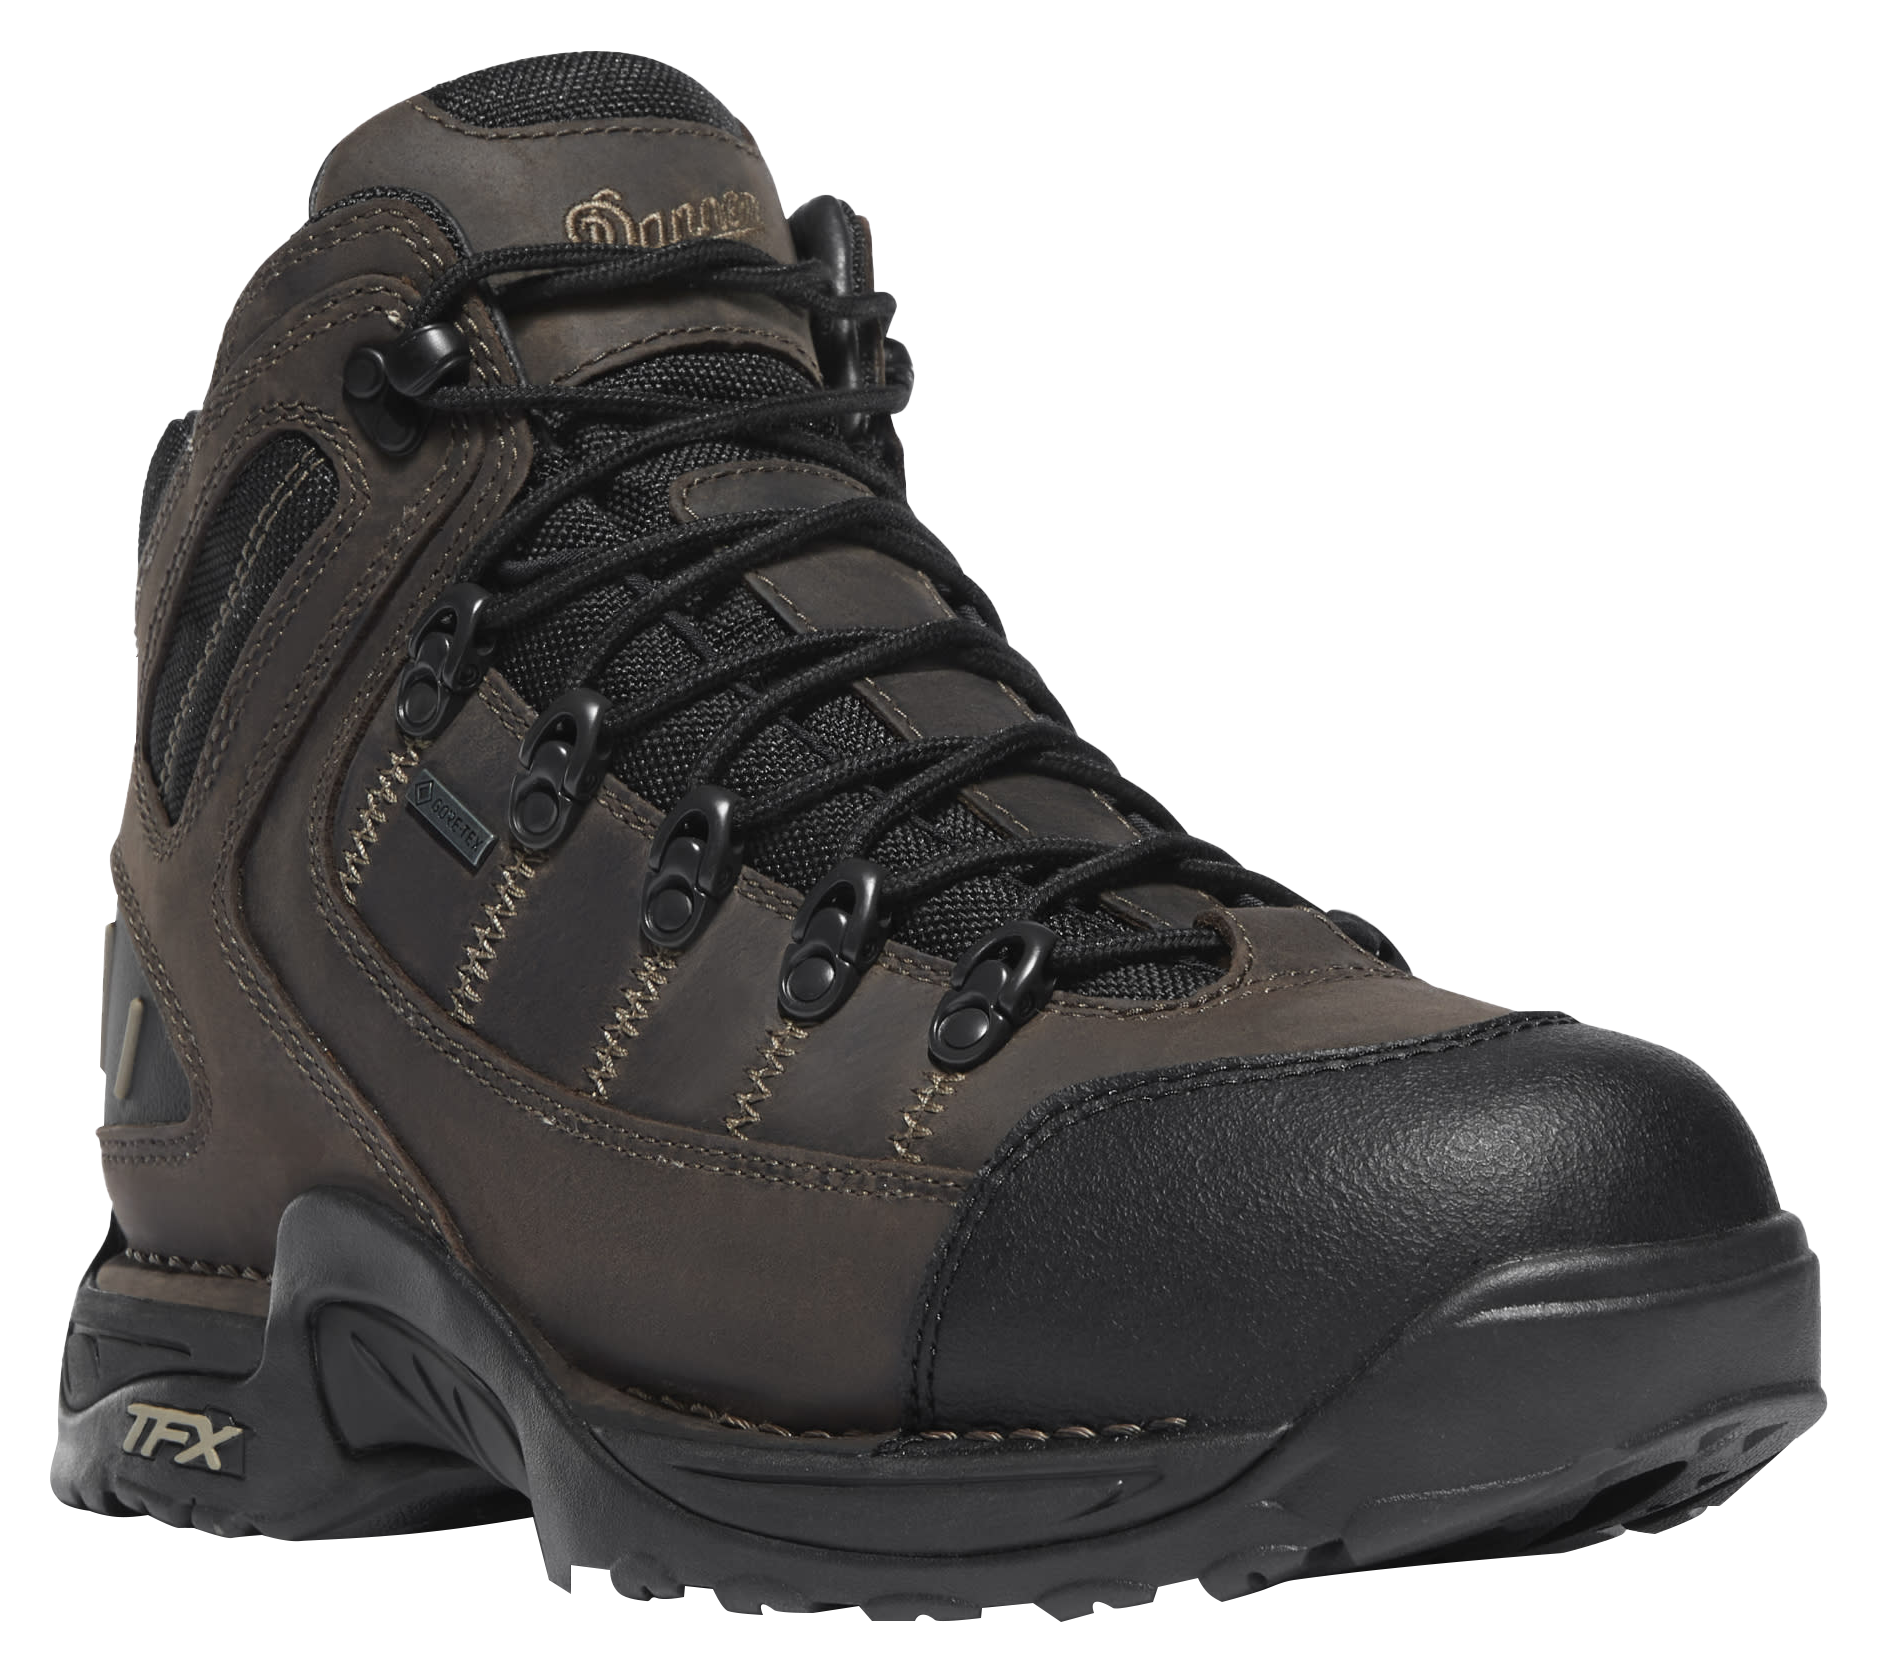 Danner 453 GORE-TEX Waterproof Hiking Boots for Men - Loam Brown/Chocolate Chip - 10W